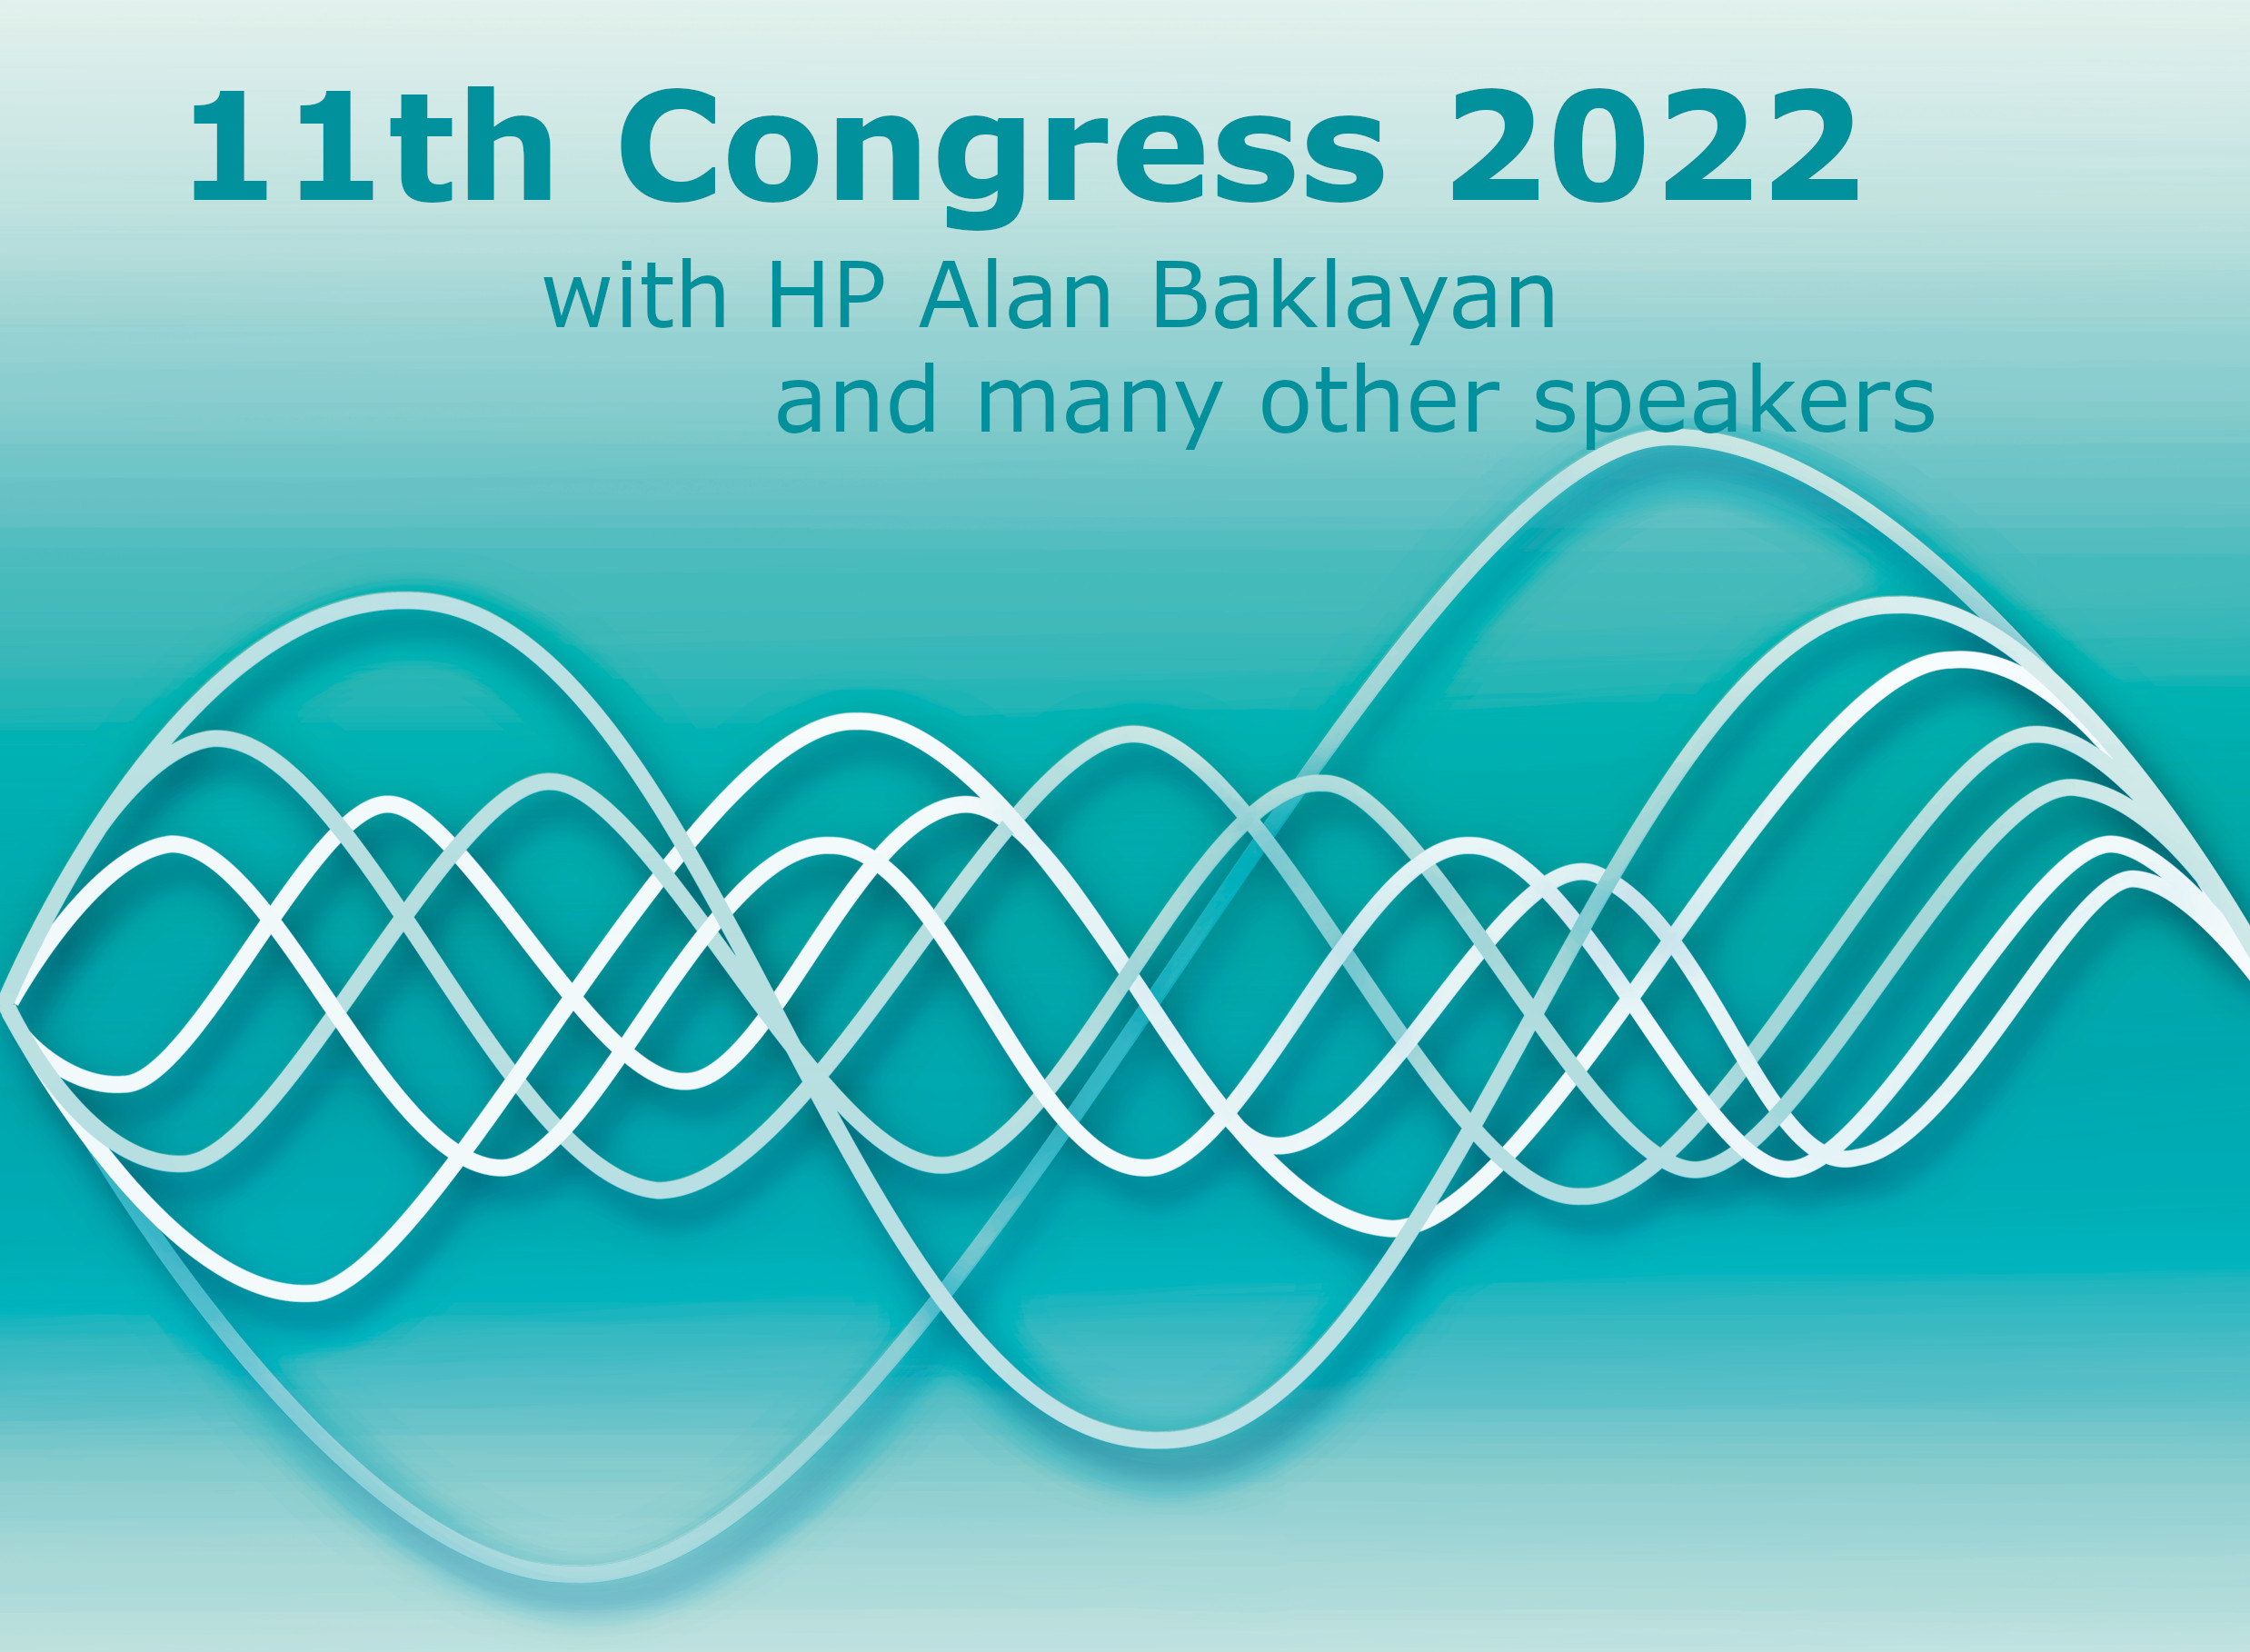 11th Congress for frequency and regulation therapy 2022